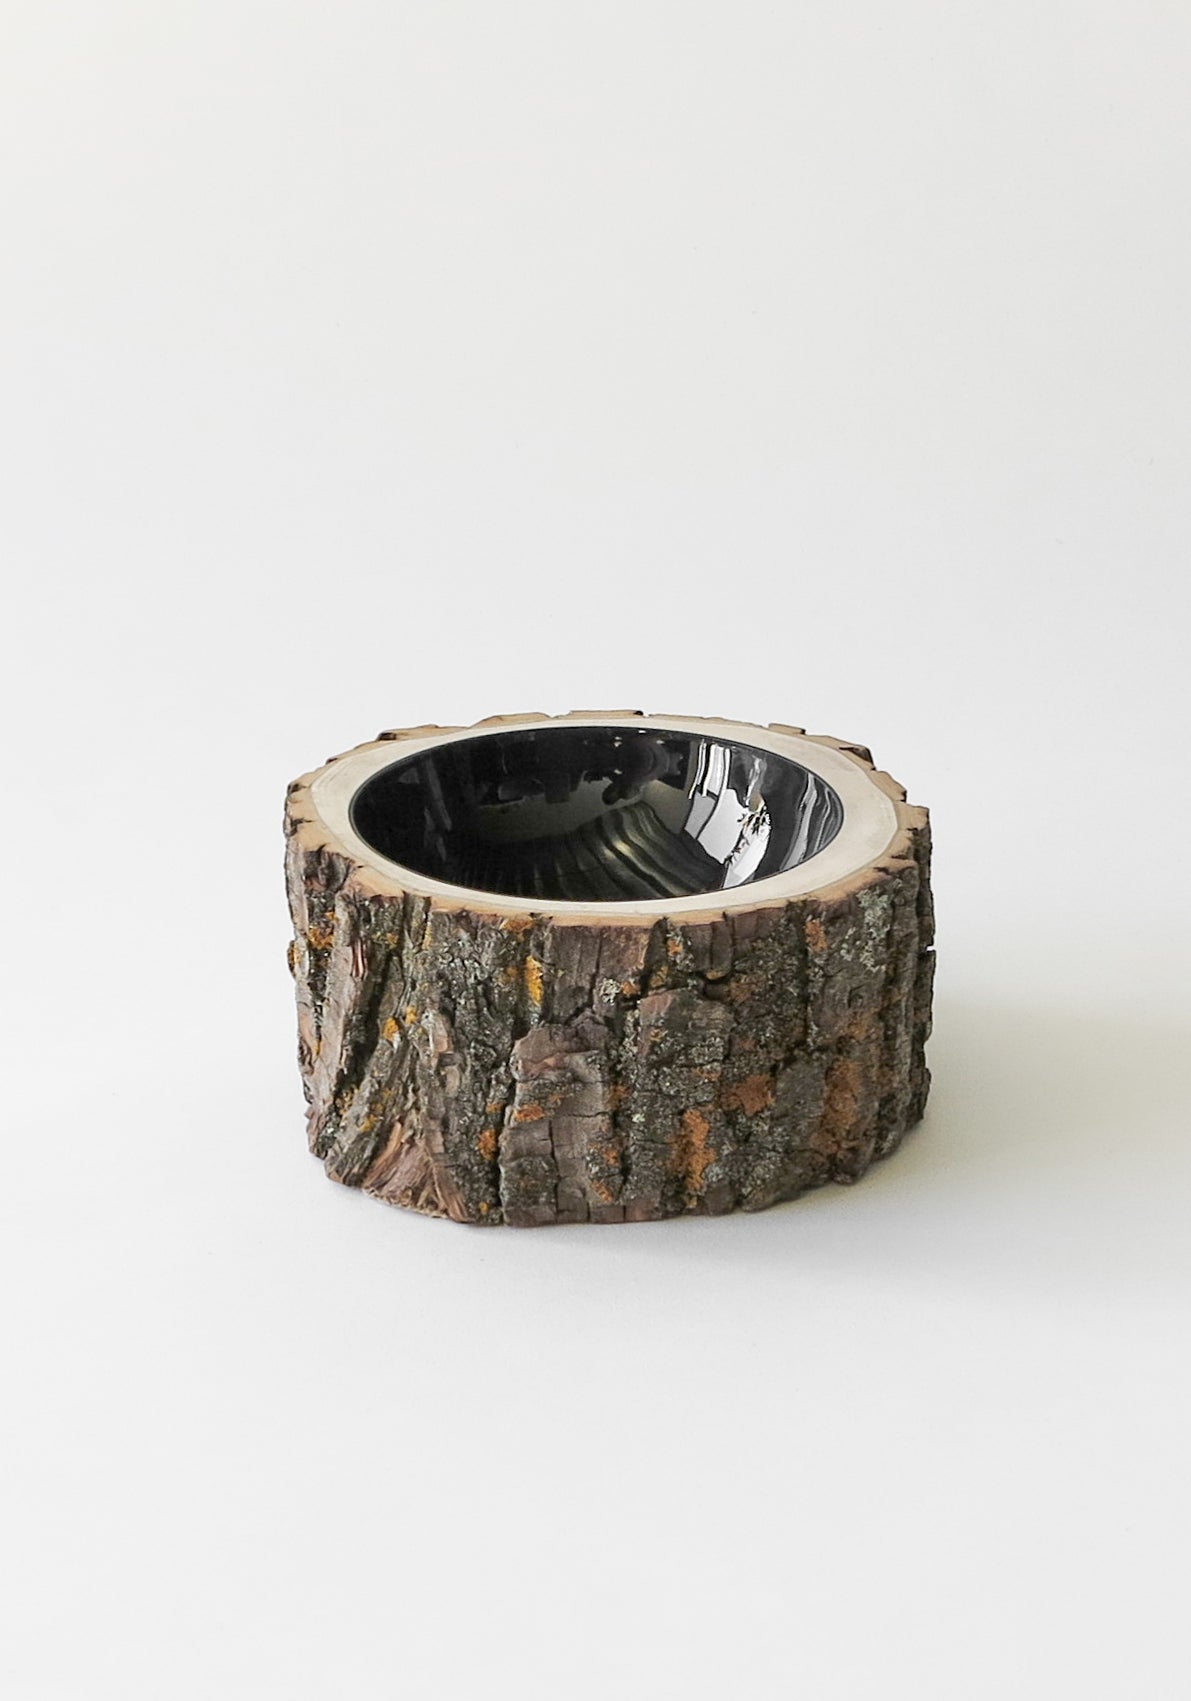 Size 6 Log Bowl - medium wooden bowl with rough bark, glossy interior is black in colour.